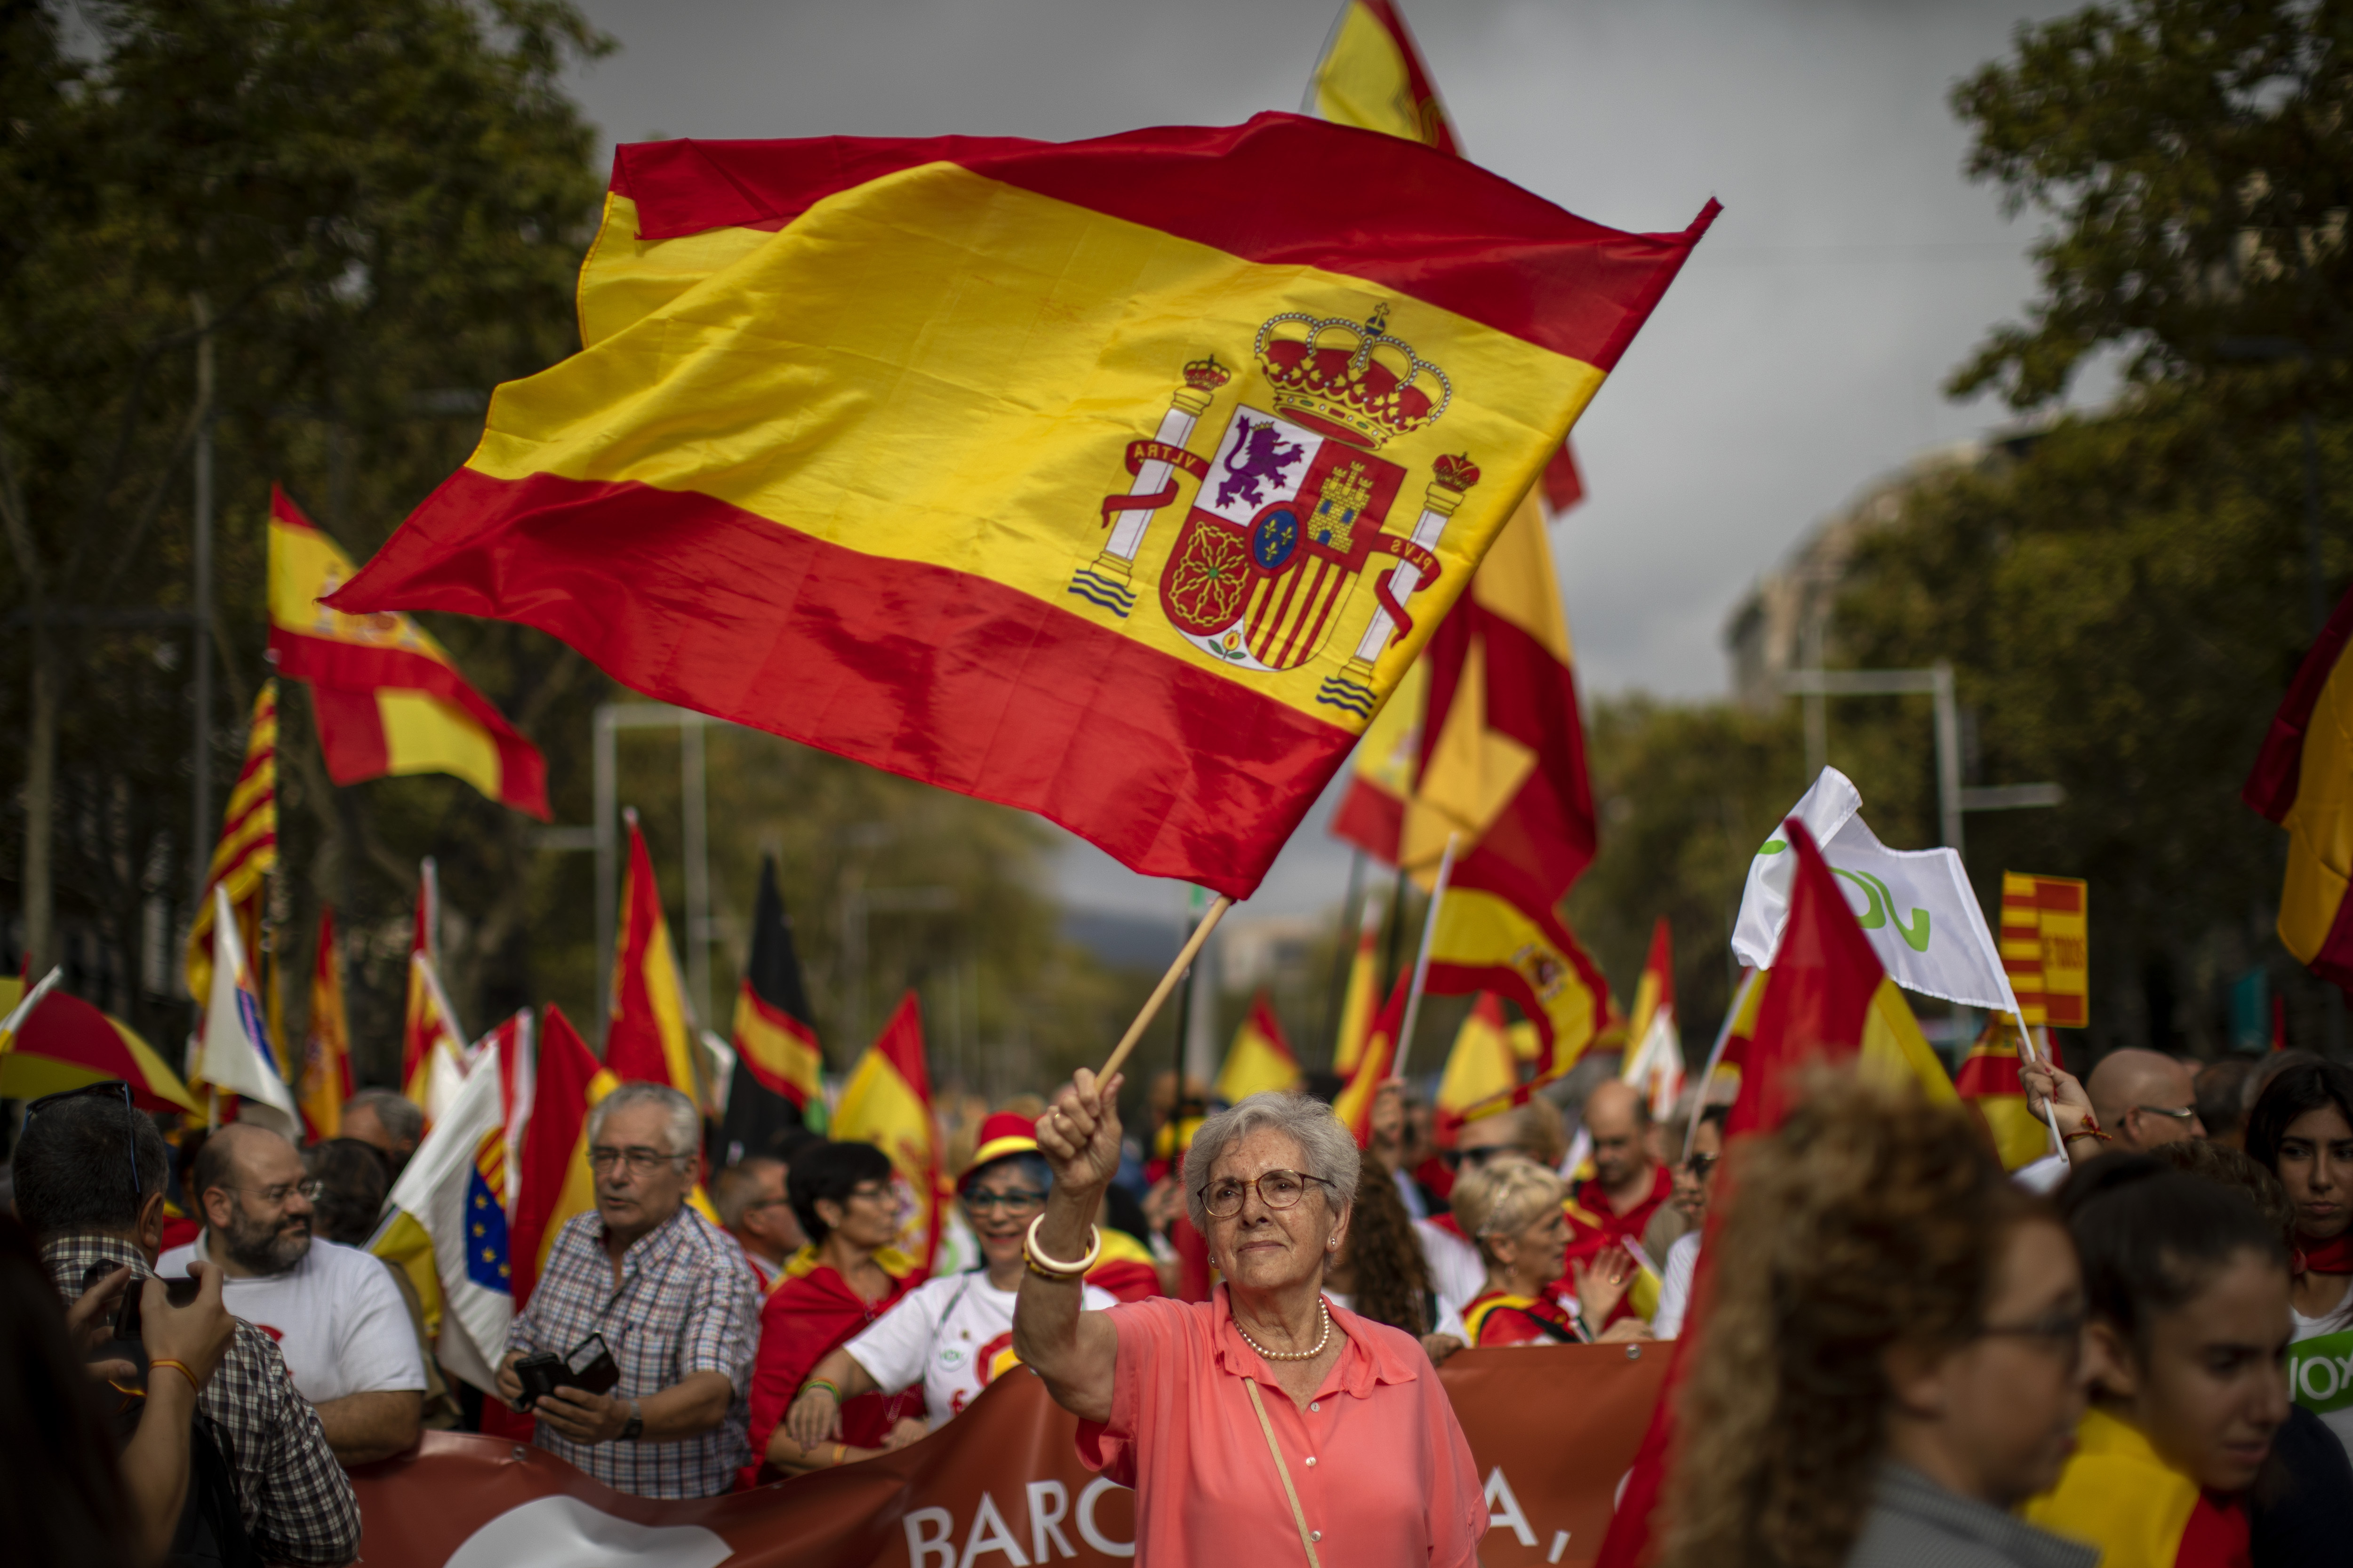 People wave Spanish flags as they celebrate a holiday known as 